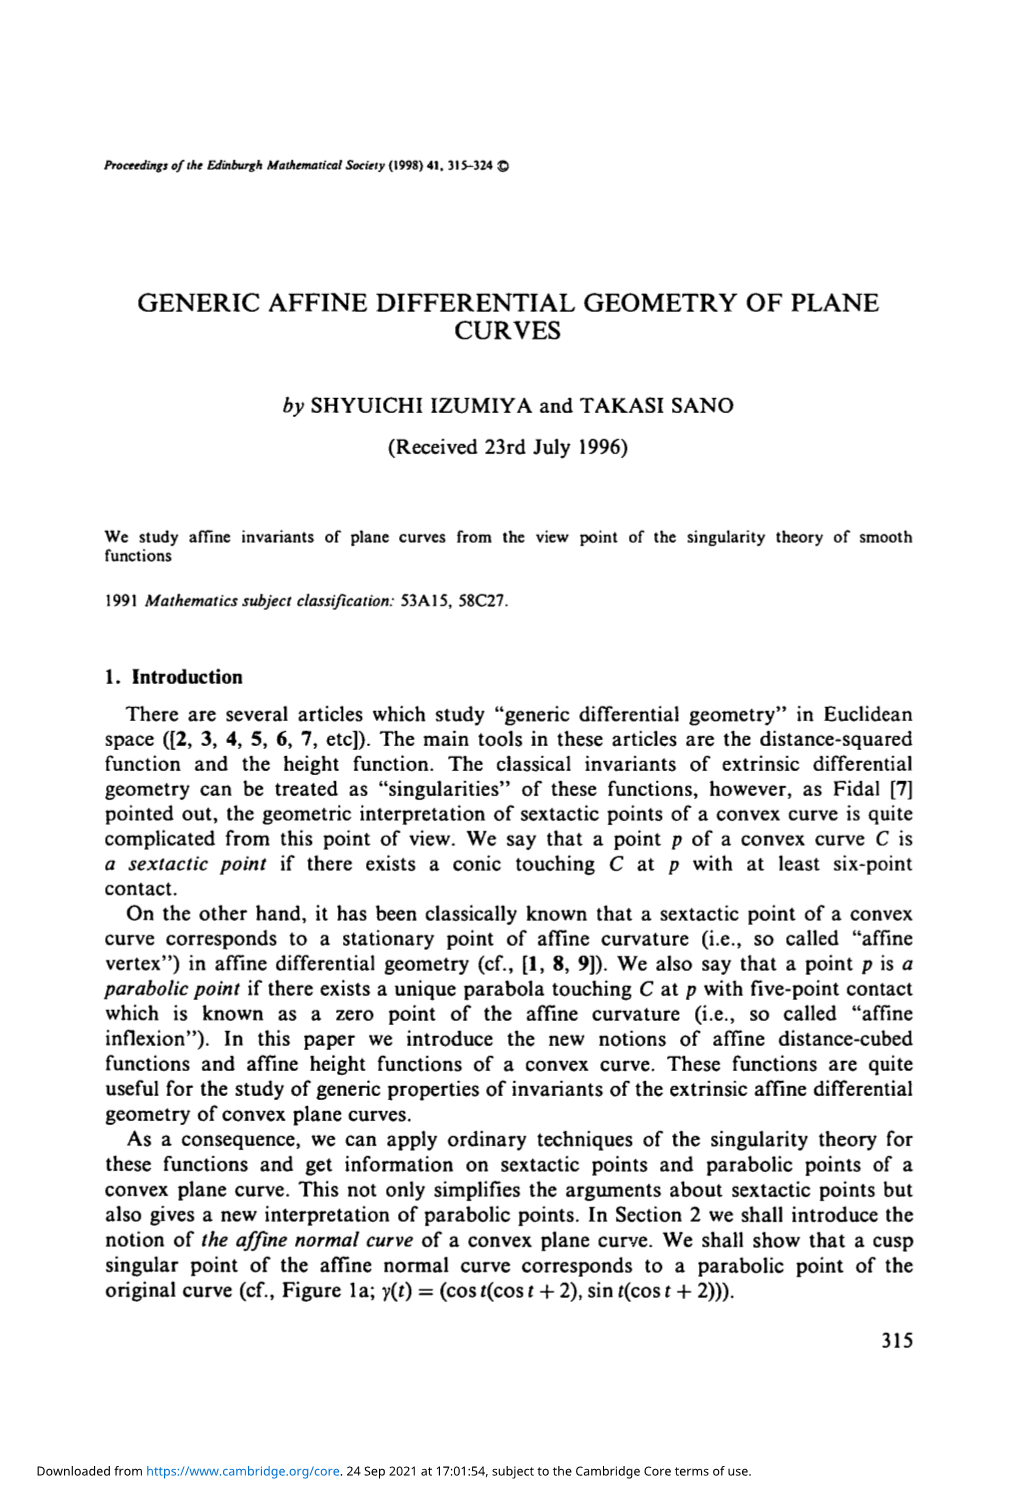 Generic Affine Differential Geometry of Plane Curves